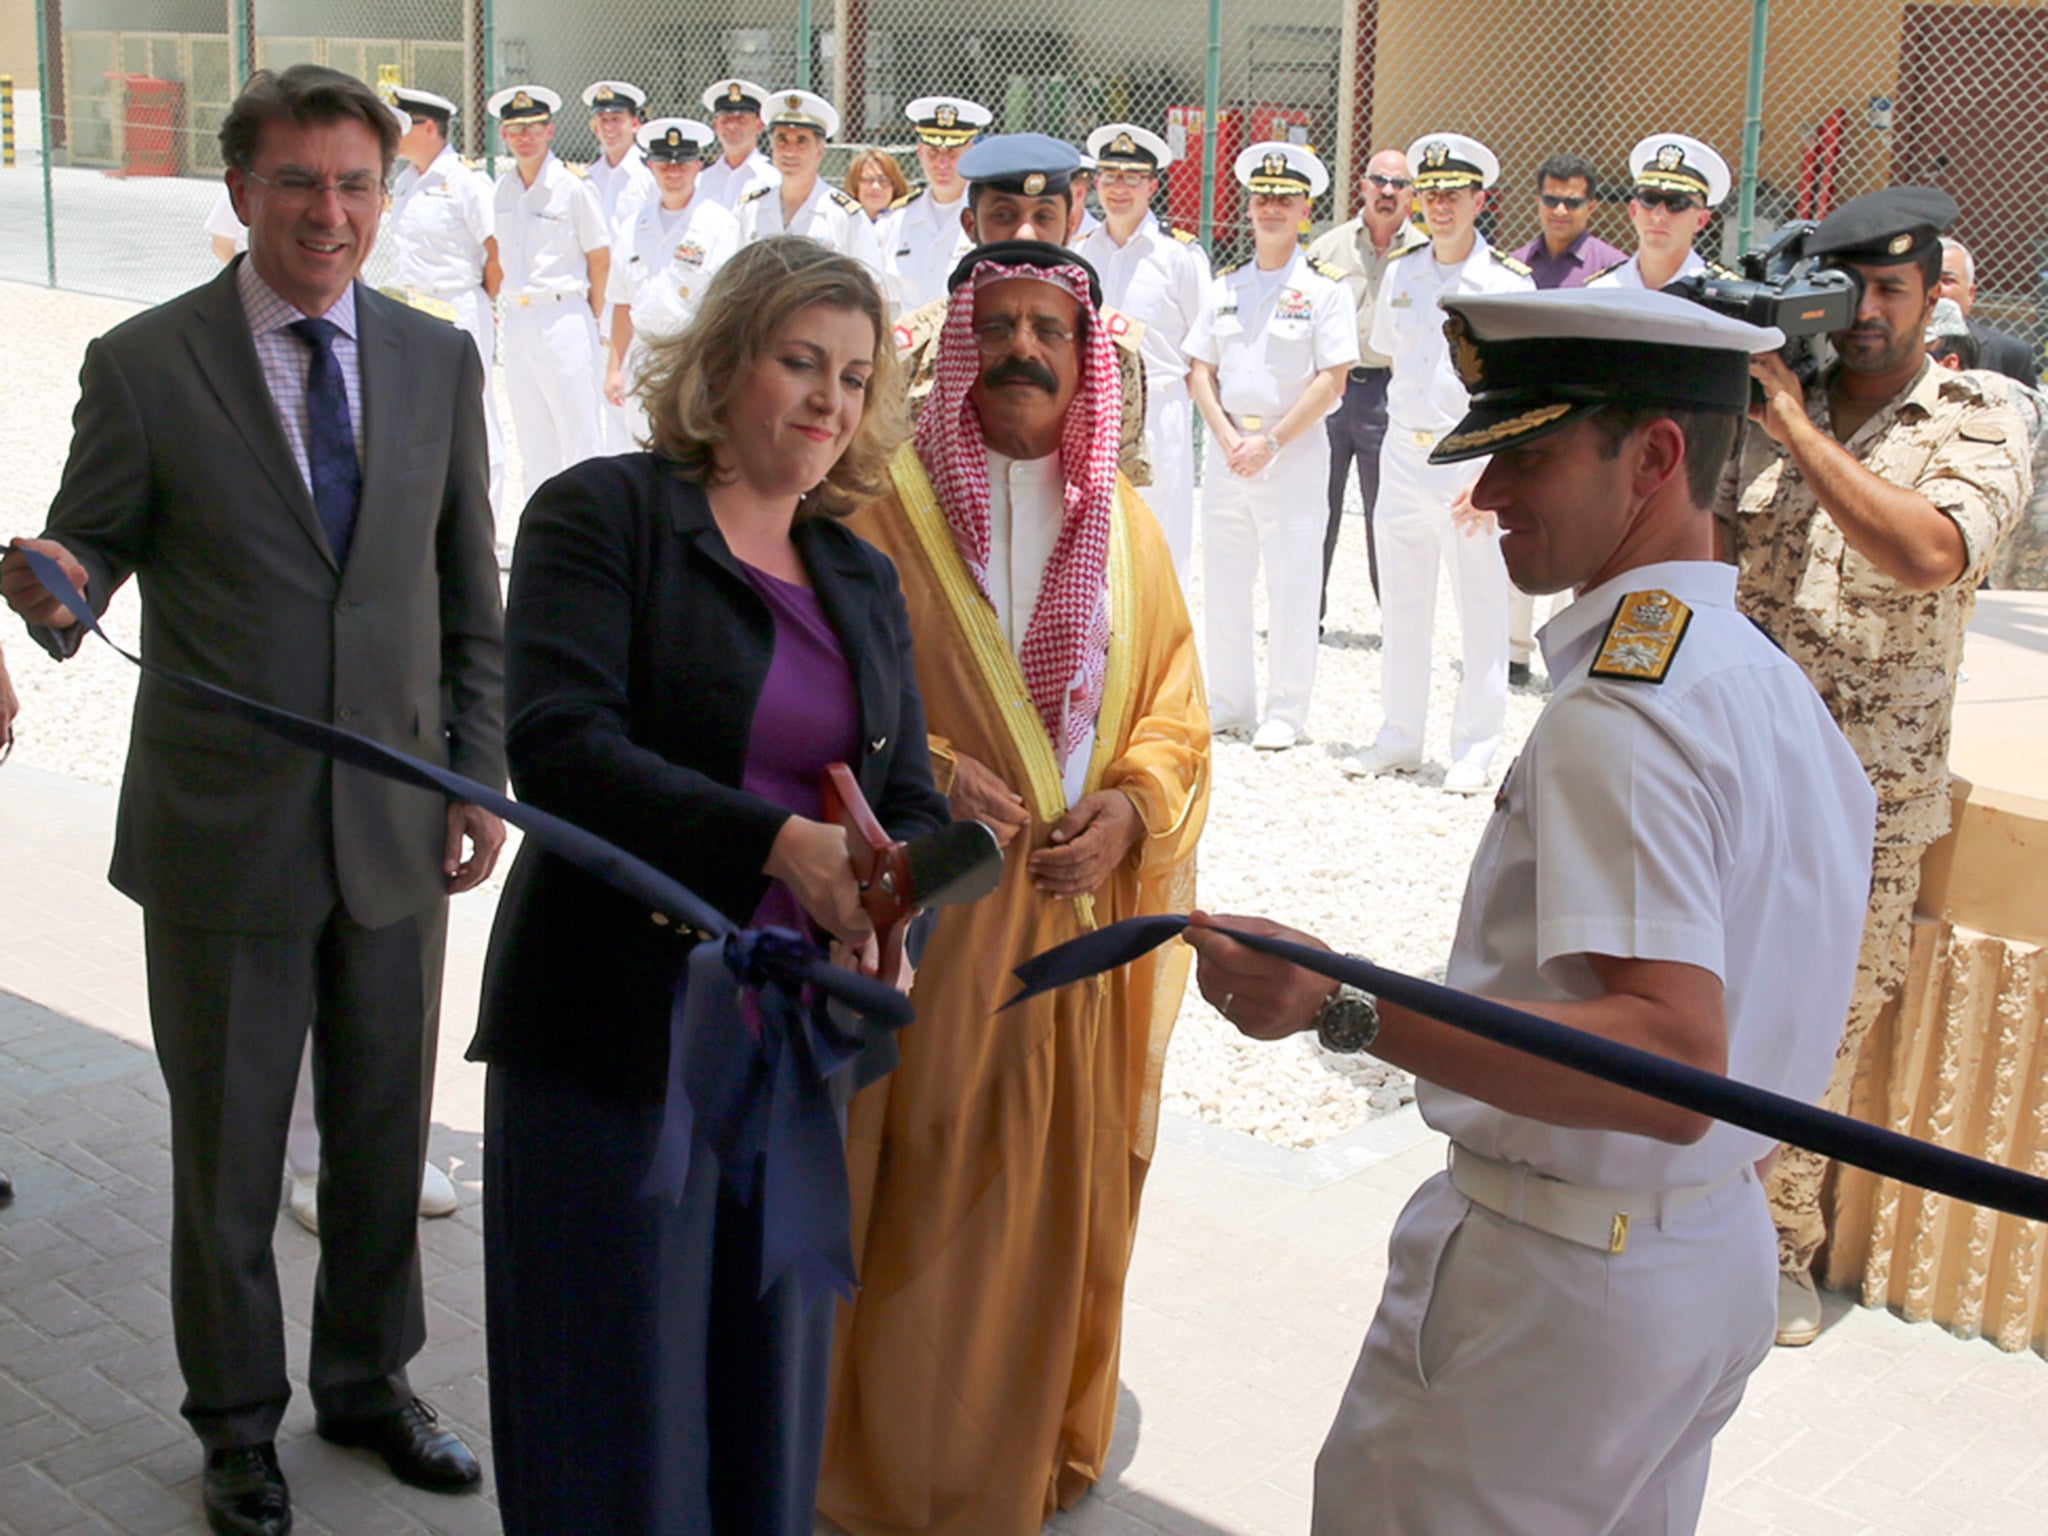 Armed Forces Minister Penny Mordaunt joins Bahraini officials and Royal Navy officers to 'open' new Royal Navy base in Bahrain